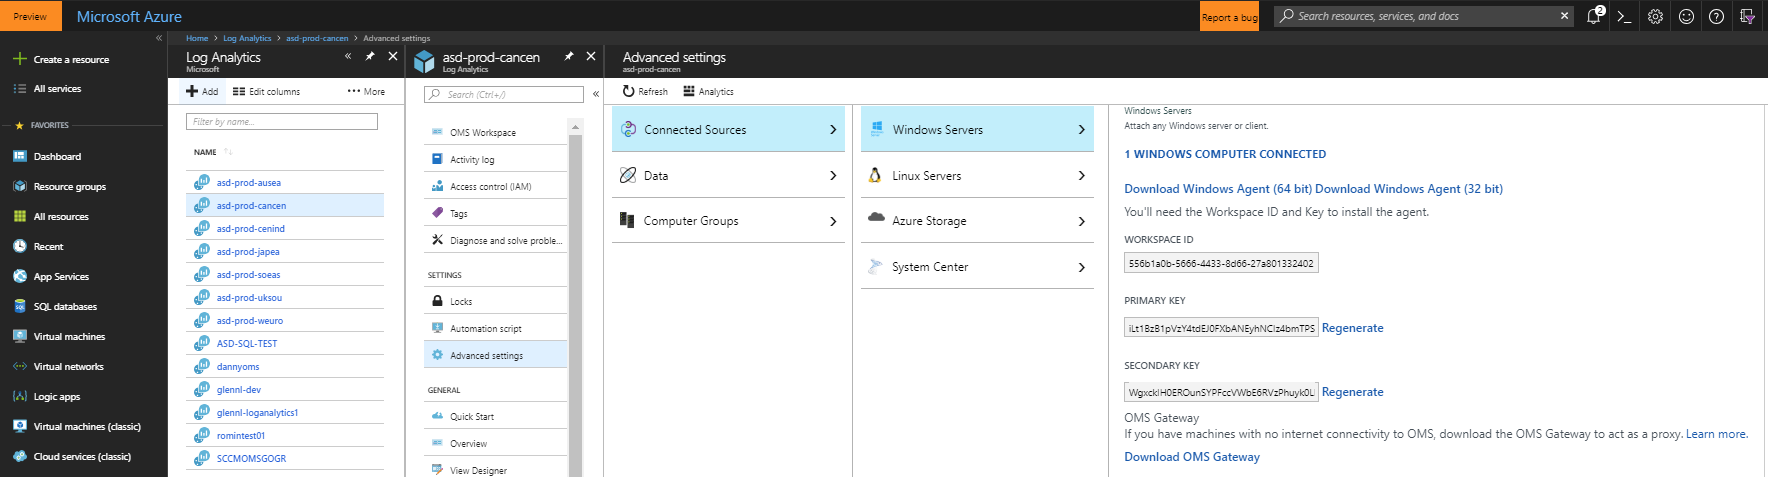 Screenshot of the Azure portal. Connected Sources and Windows Servers are selected.